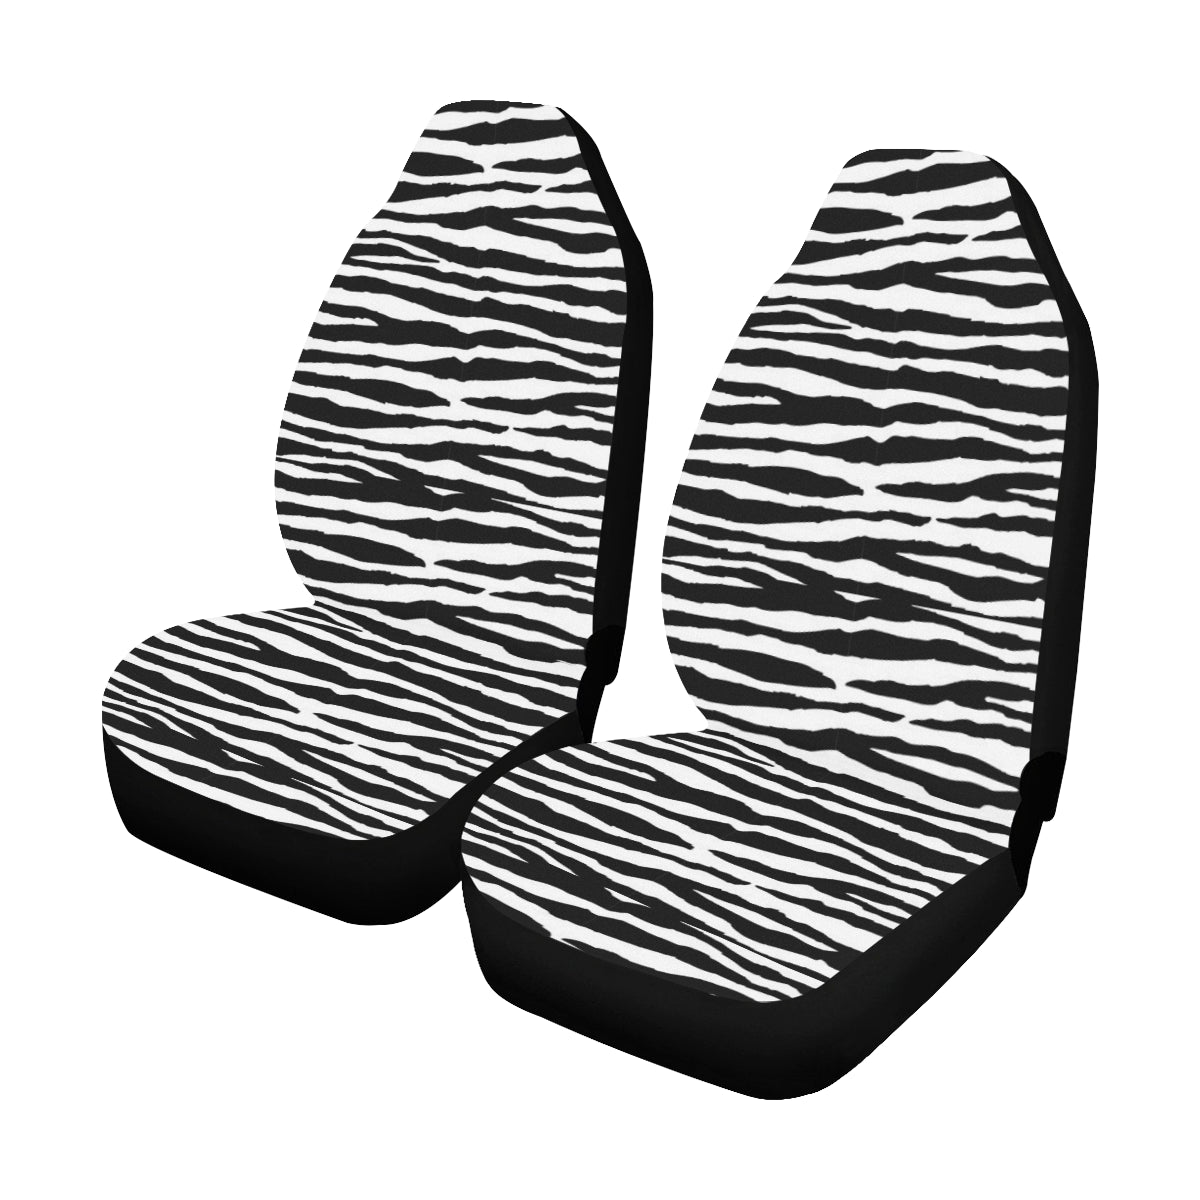 Zebra Stripes Car Seat Covers 2 pc, Animal Print Black White Pattern Front Seat Covers, Car SUV Seat Protector Accessory Decoration Starcove Fashion